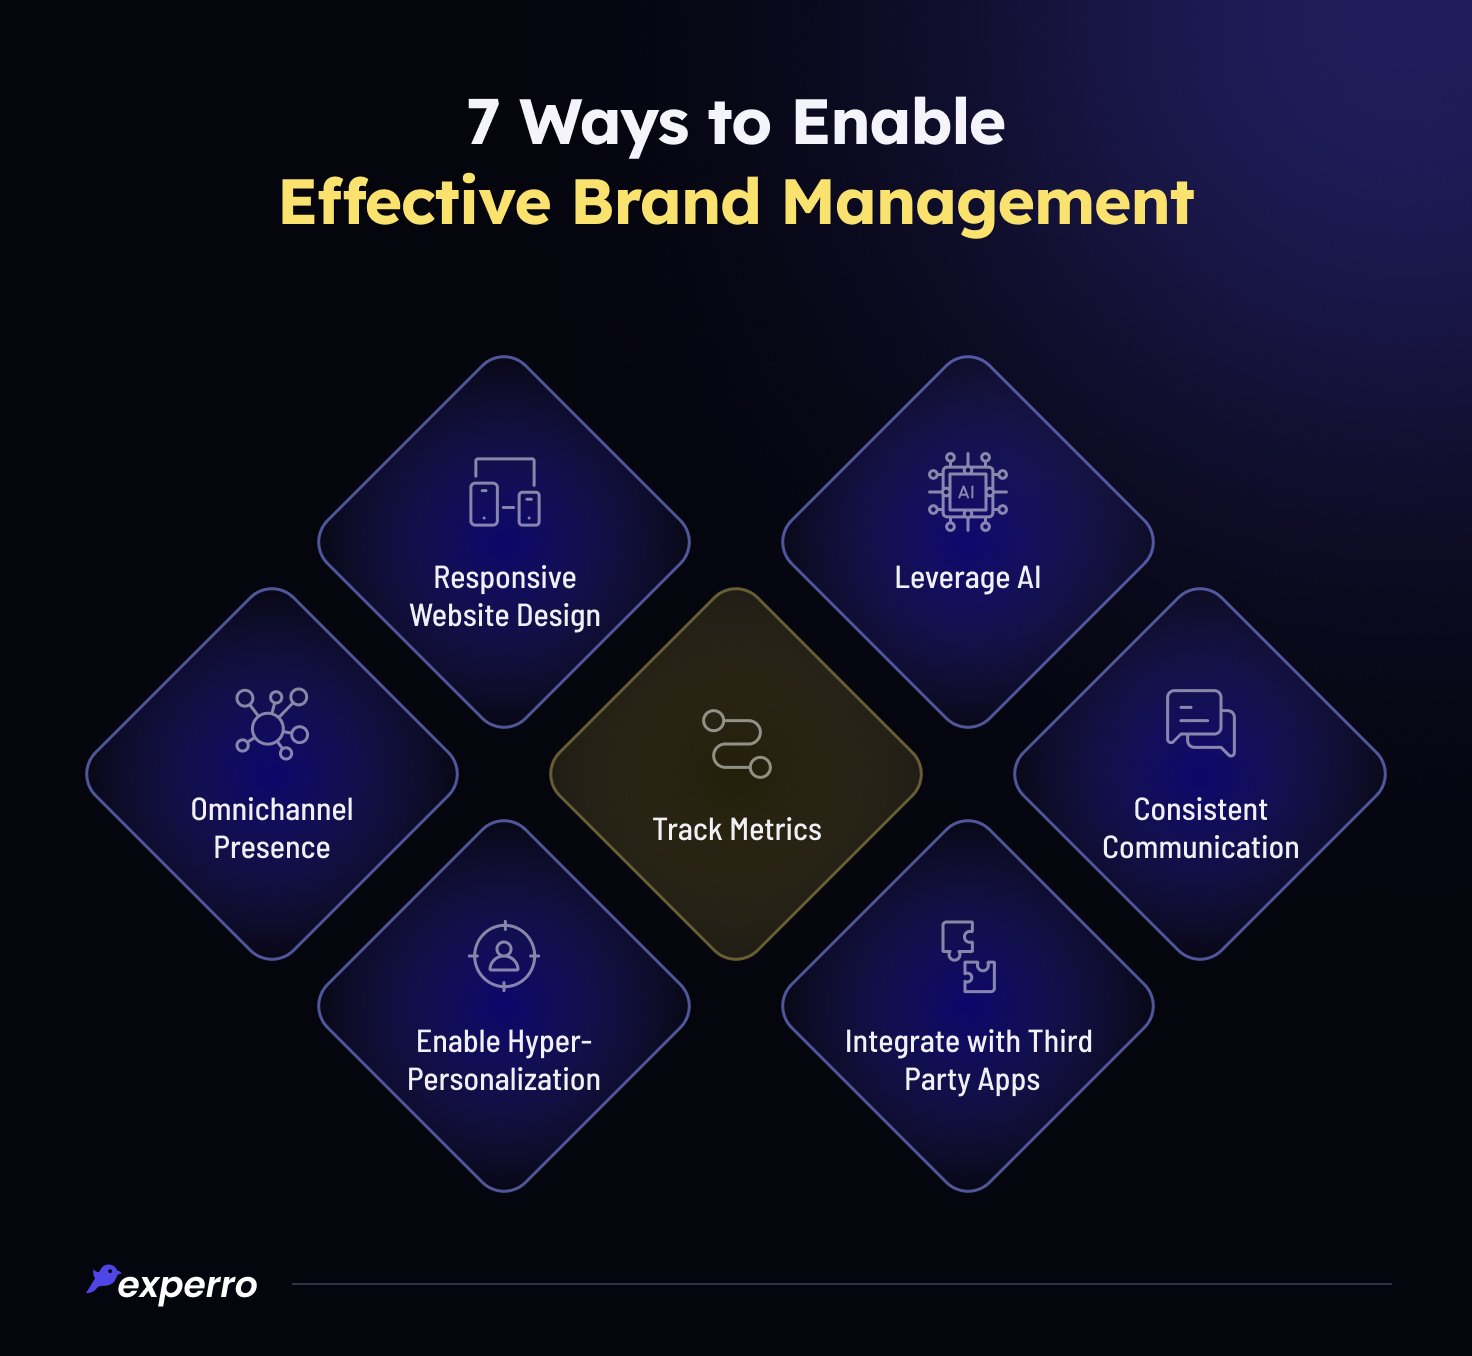 7 Ways to Enable Effective Brand Management